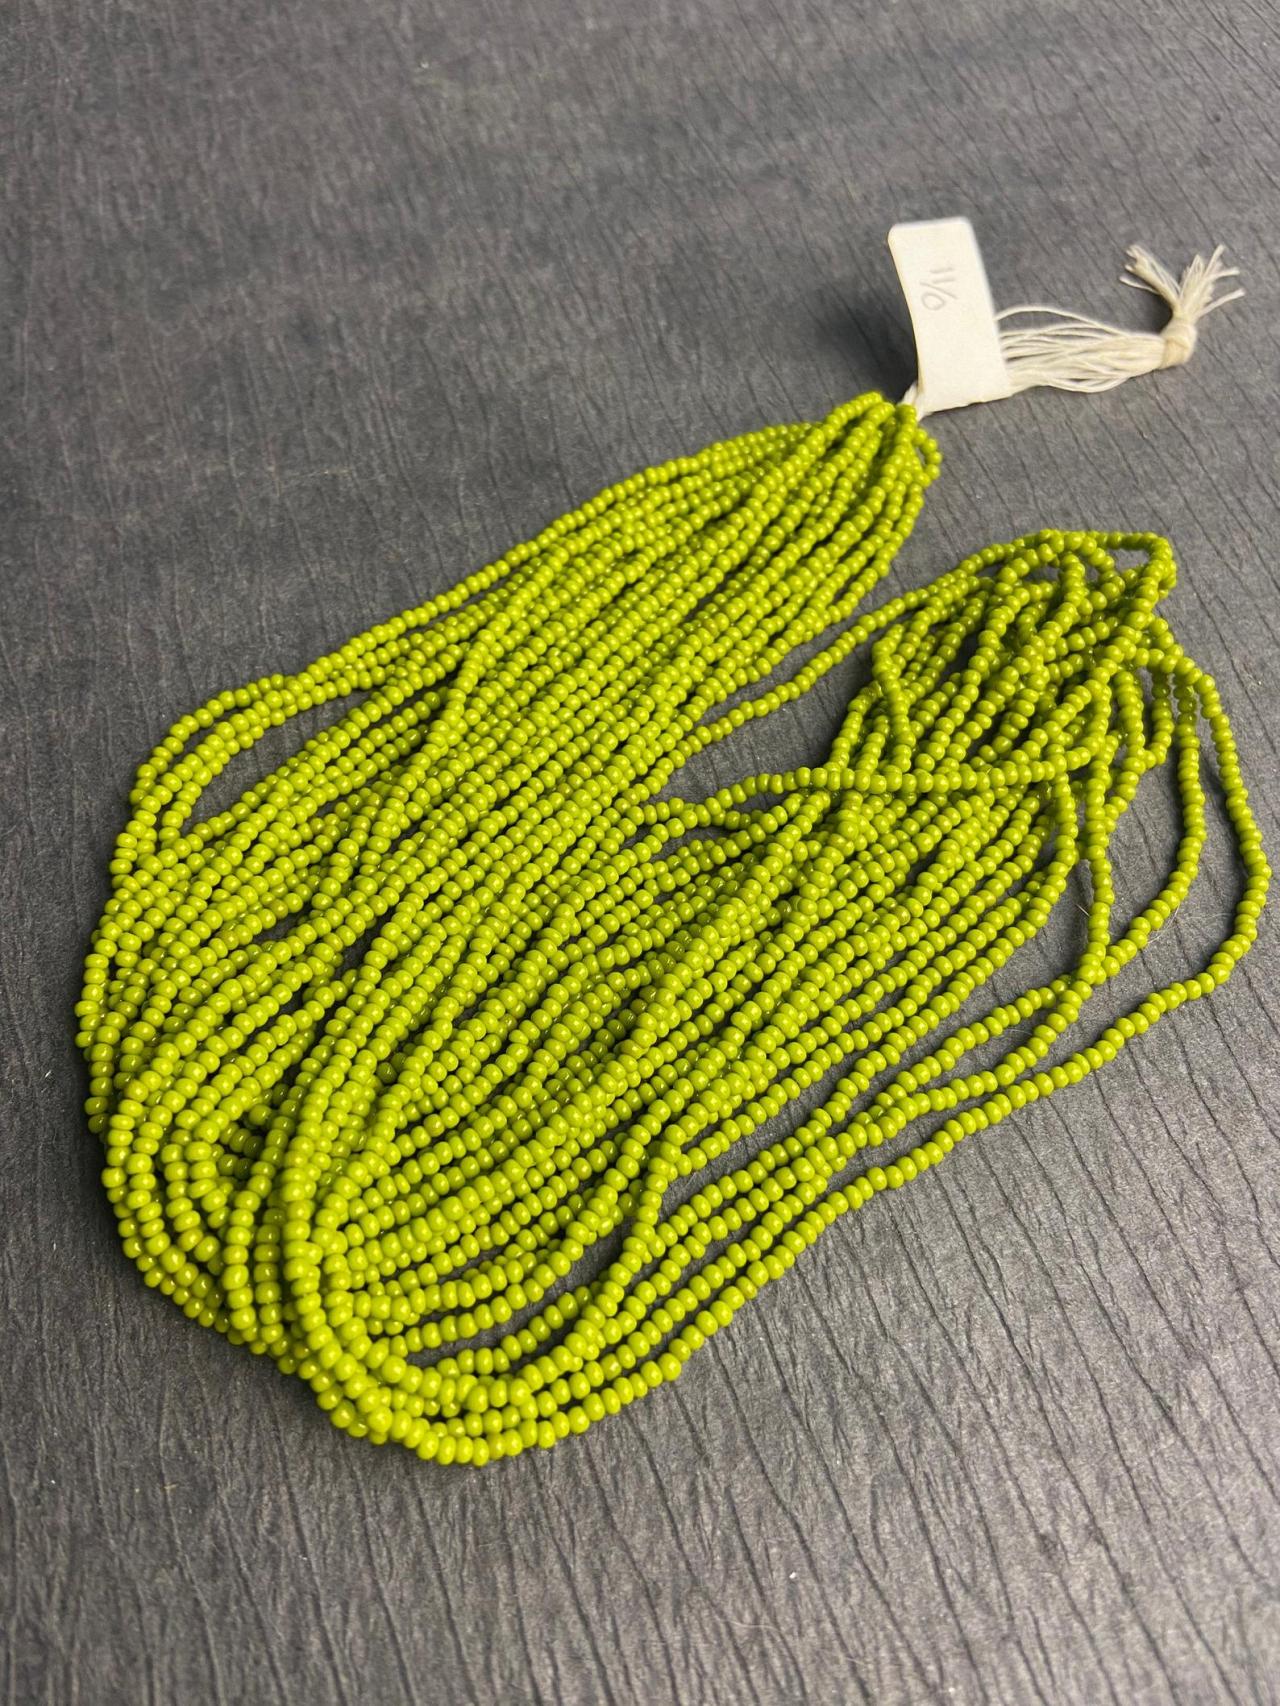 Avocado Green 11/0 Czech Limited Edition Color Seed Beads 12 Strand Hank Opaque